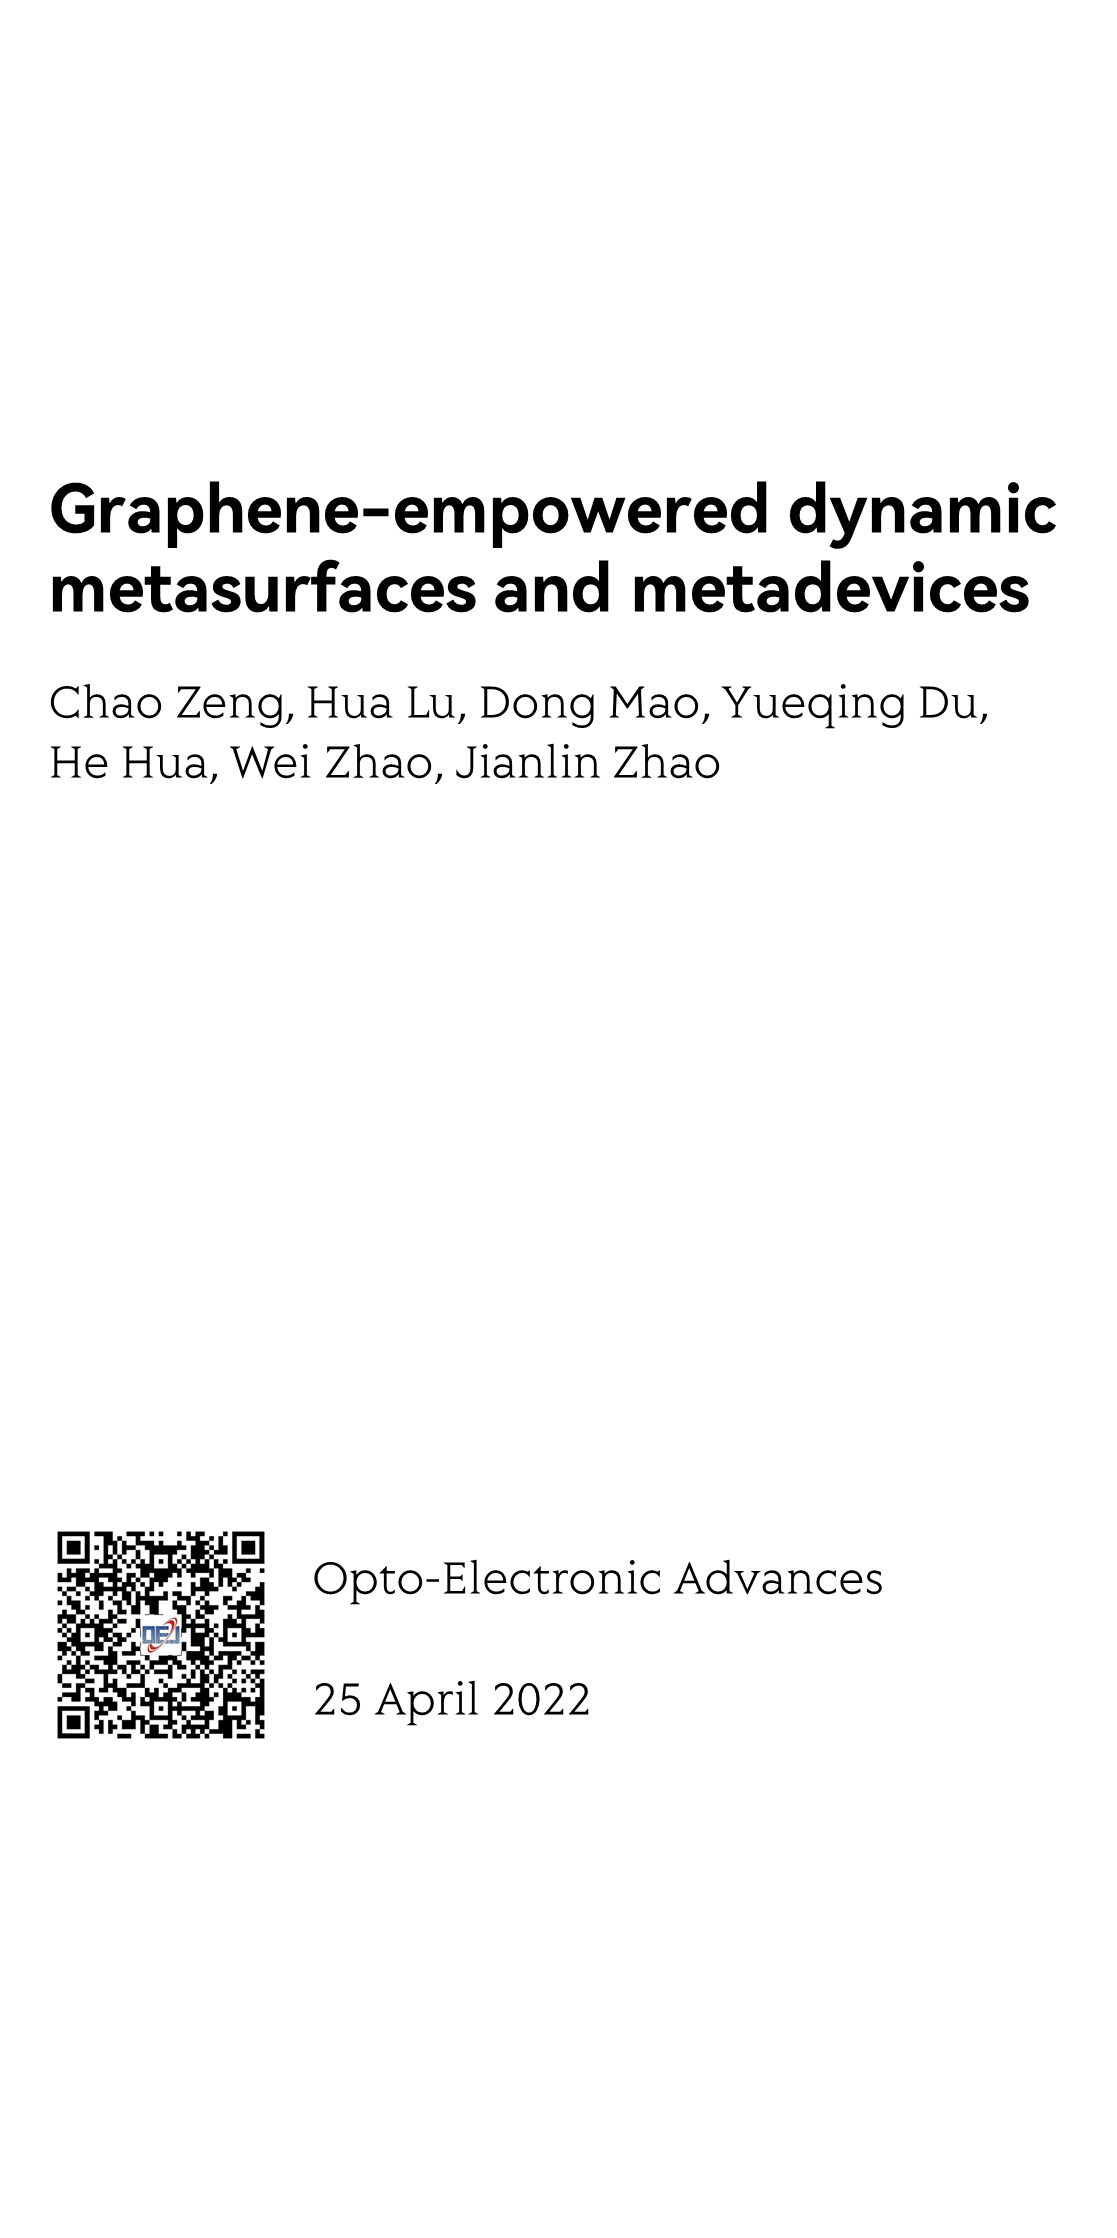 Graphene-empowered dynamic metasurfaces and metadevices_1